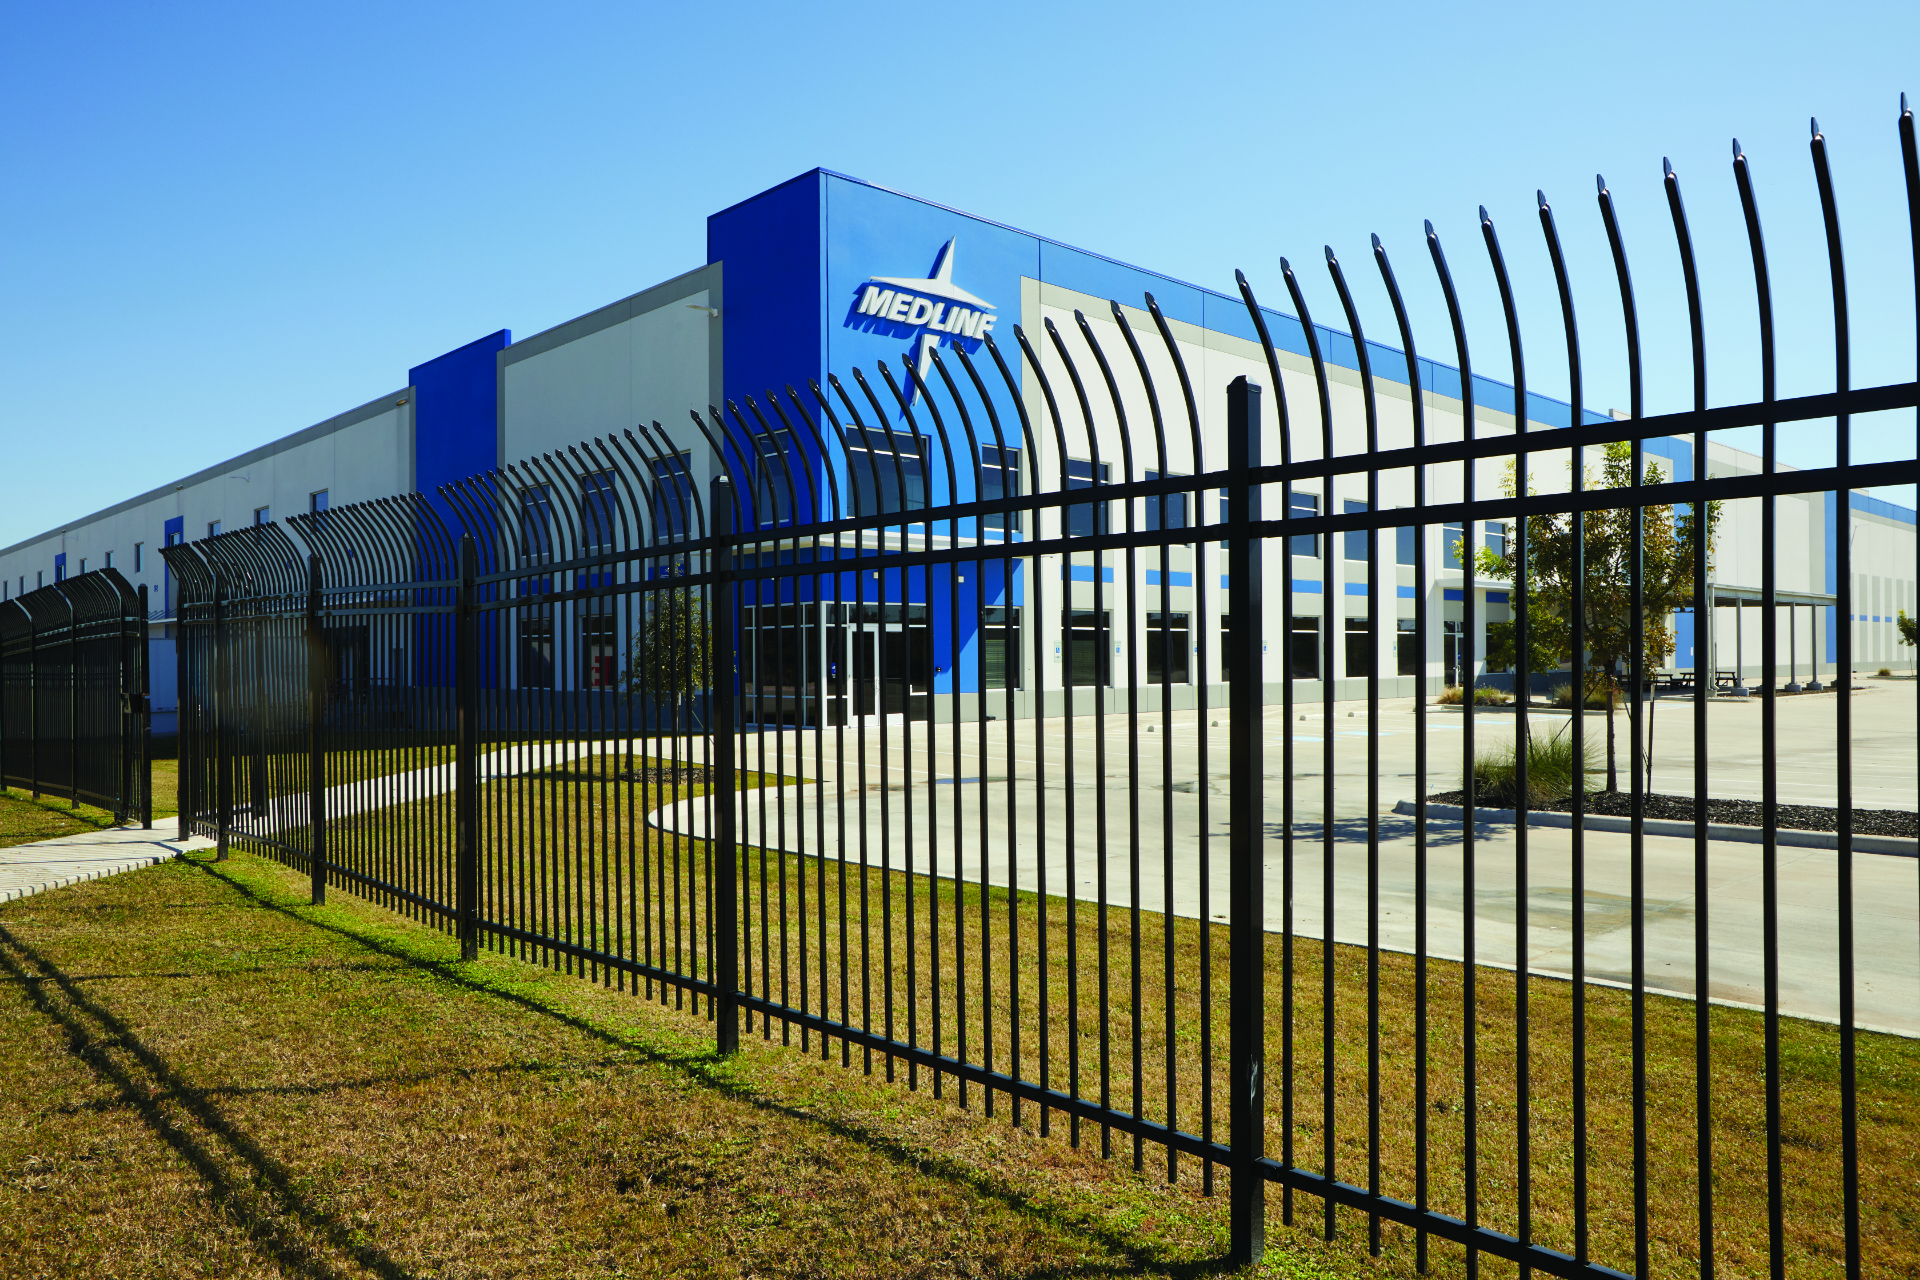 Modern steel fence surrounding a commercial building with Medline logo.